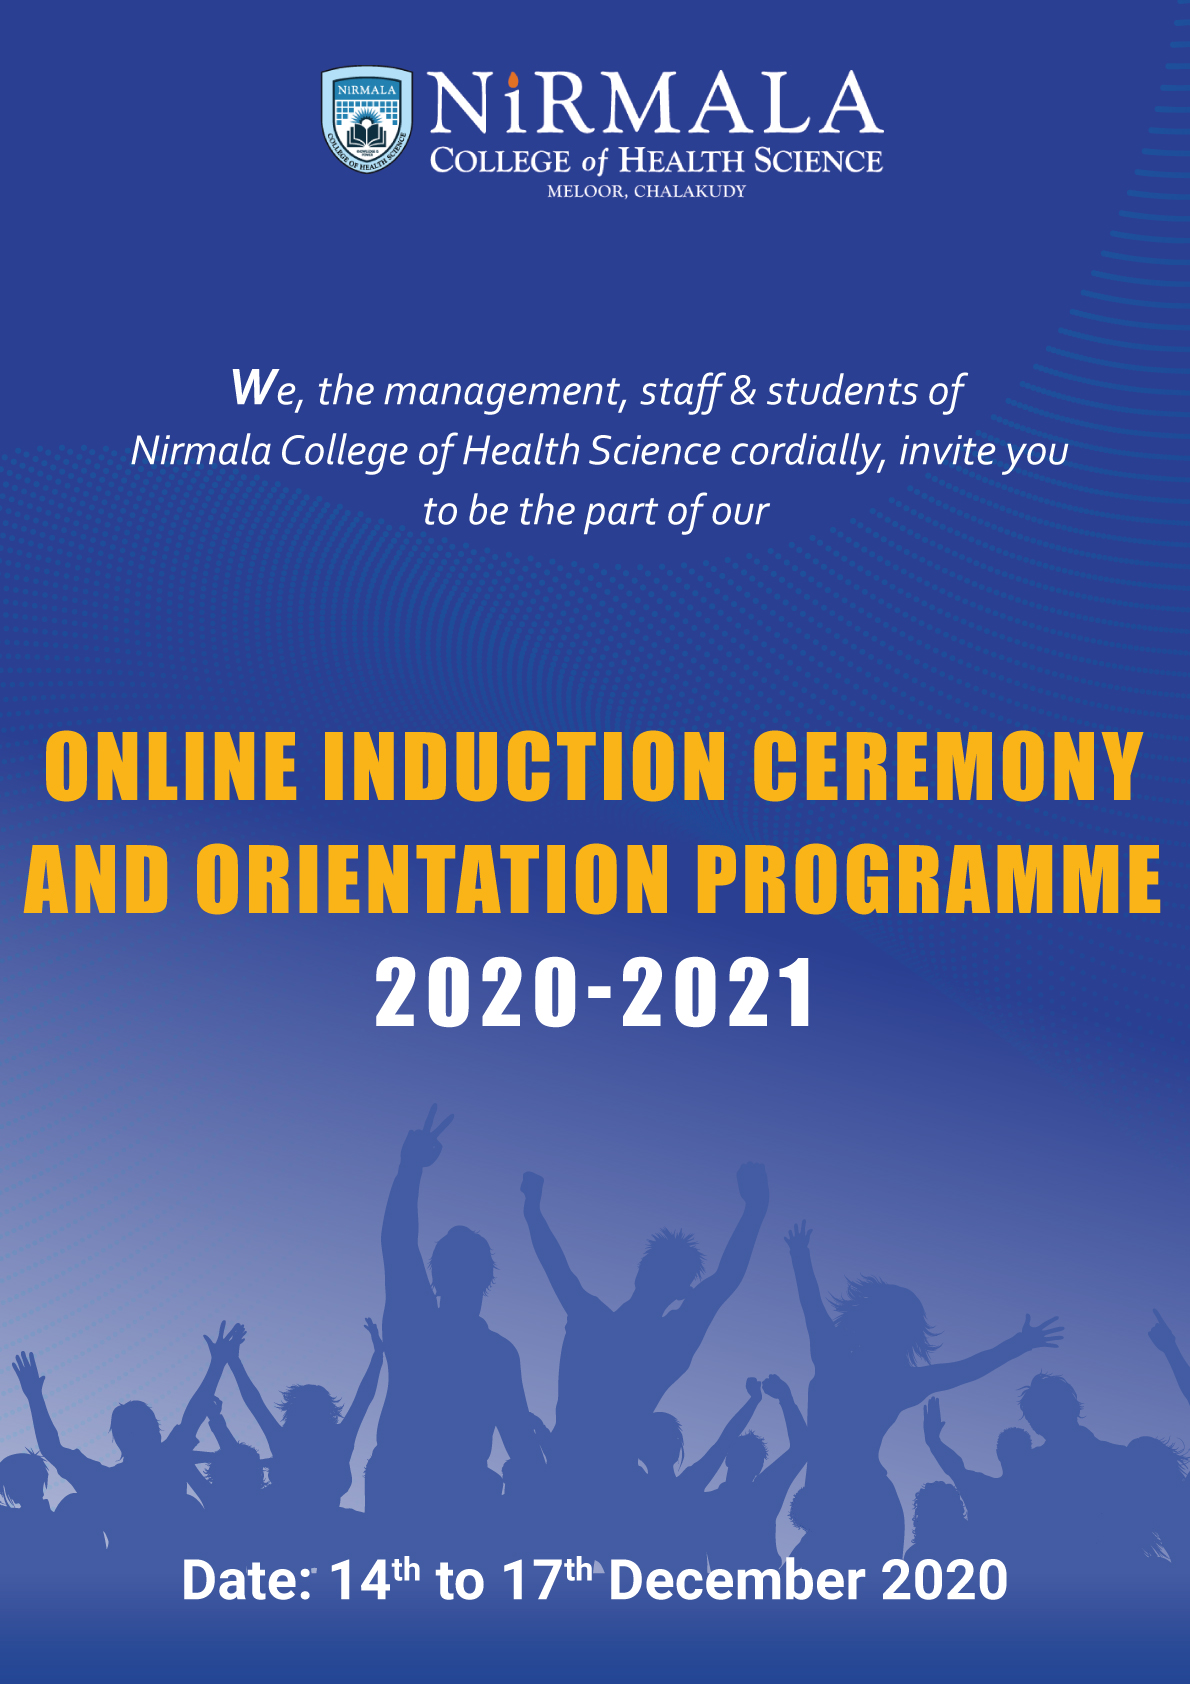 ONLINE INDUCTION CEREMONY AND ORIENTATION PROGRAMME 2020-2021